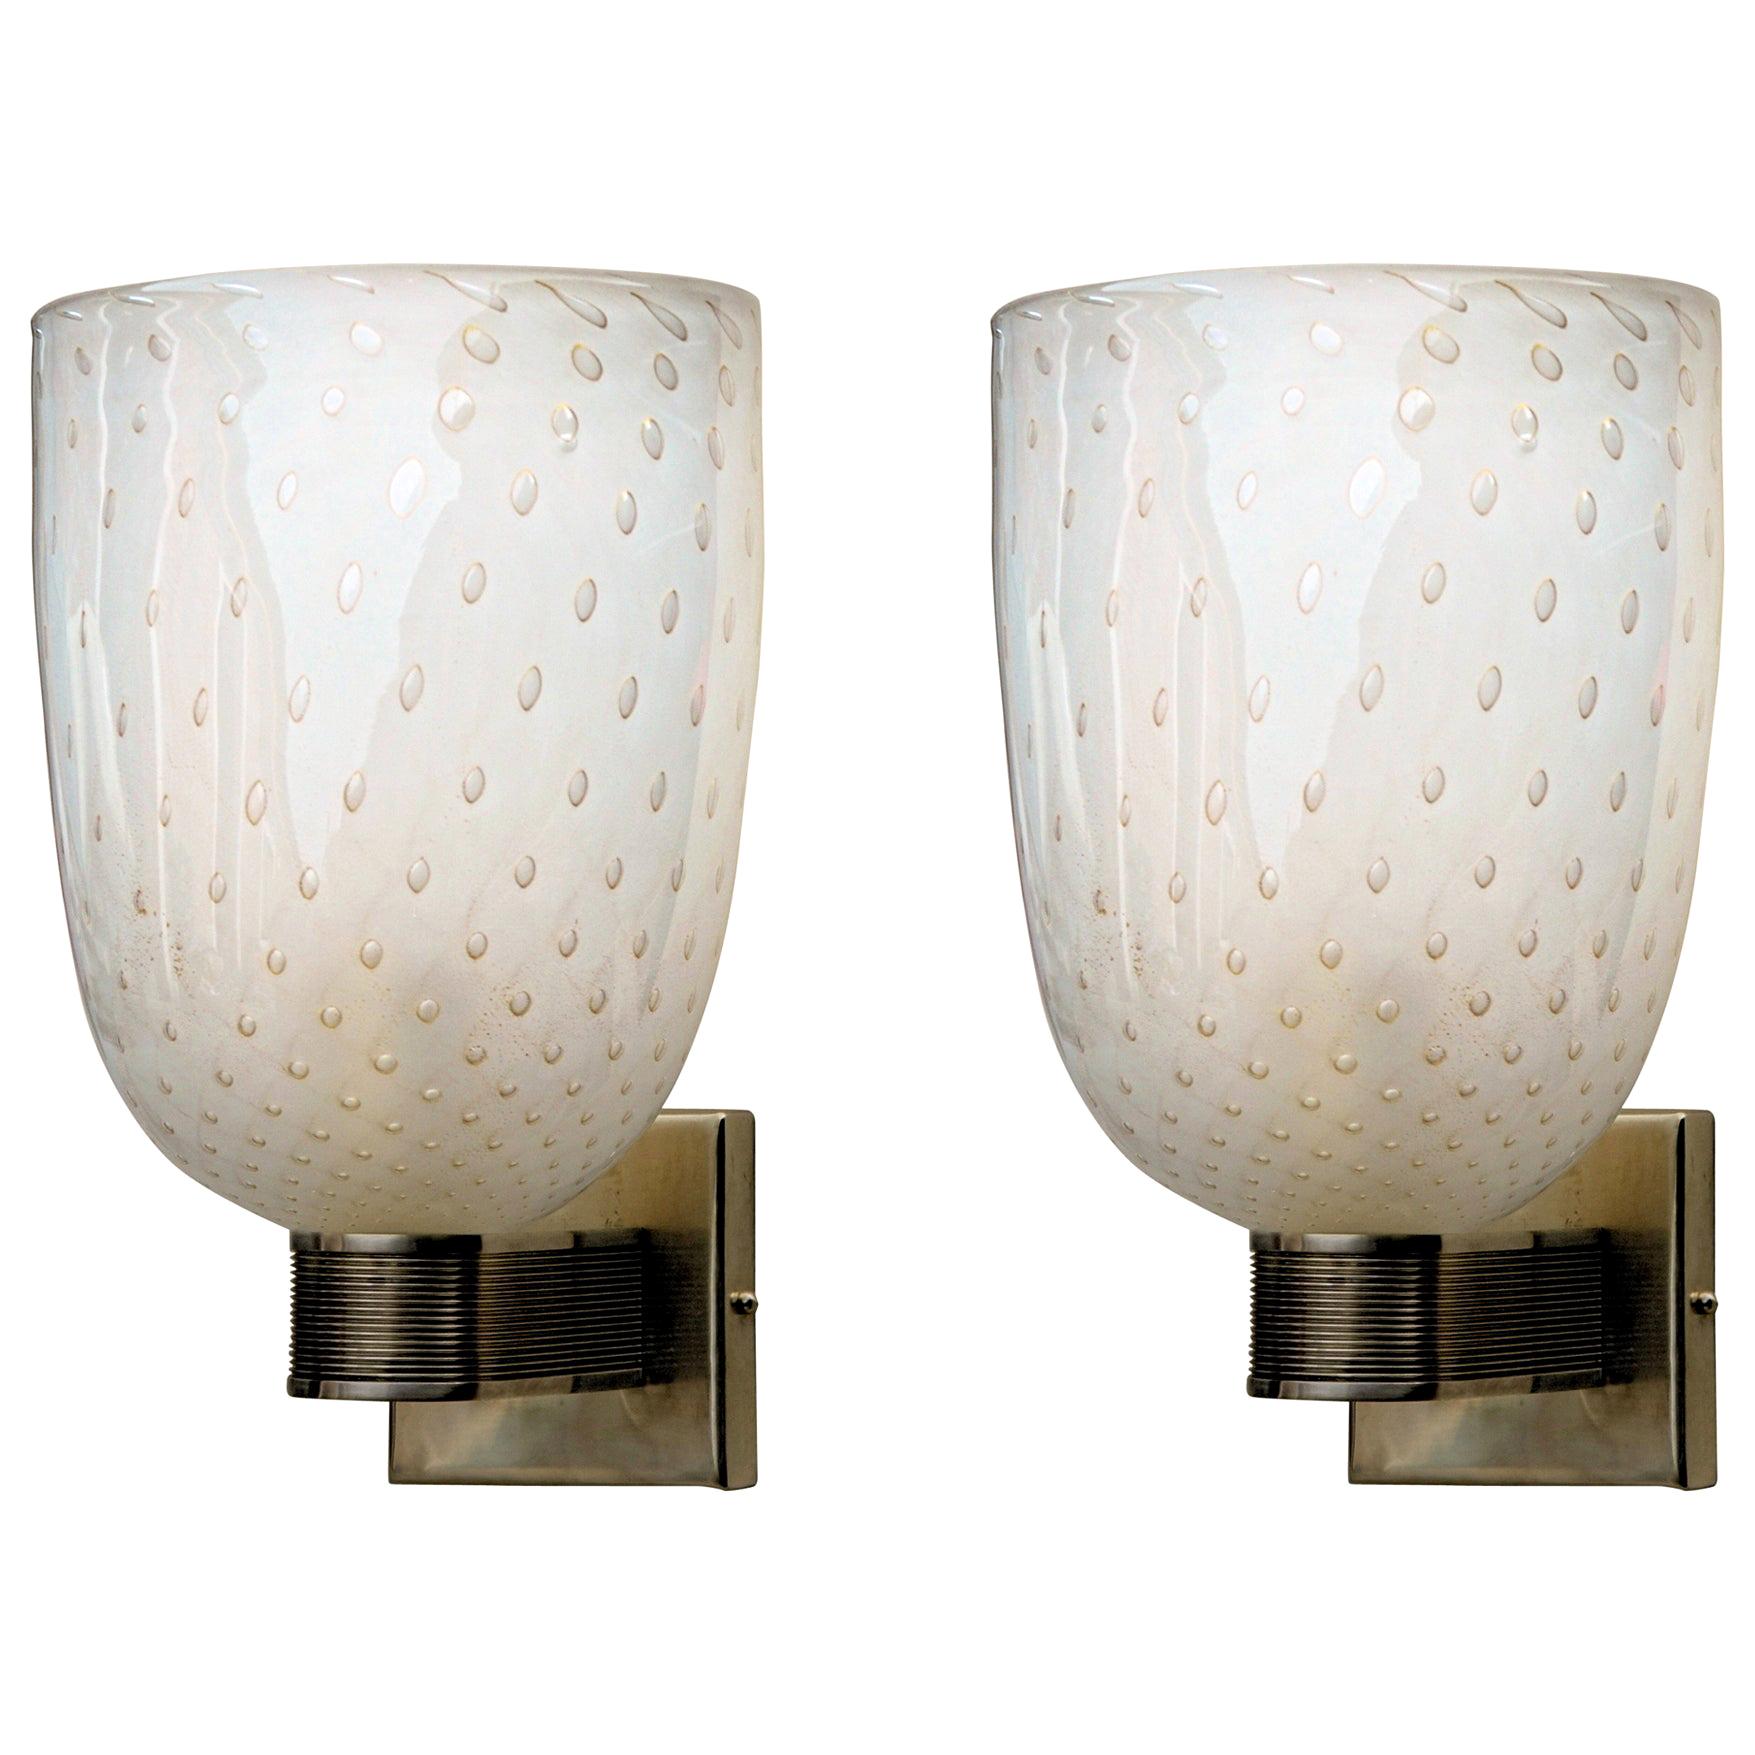 Pair of Art Deco Sconces, Brass Hardware and Gold Leaf Baloton, Jean Offer